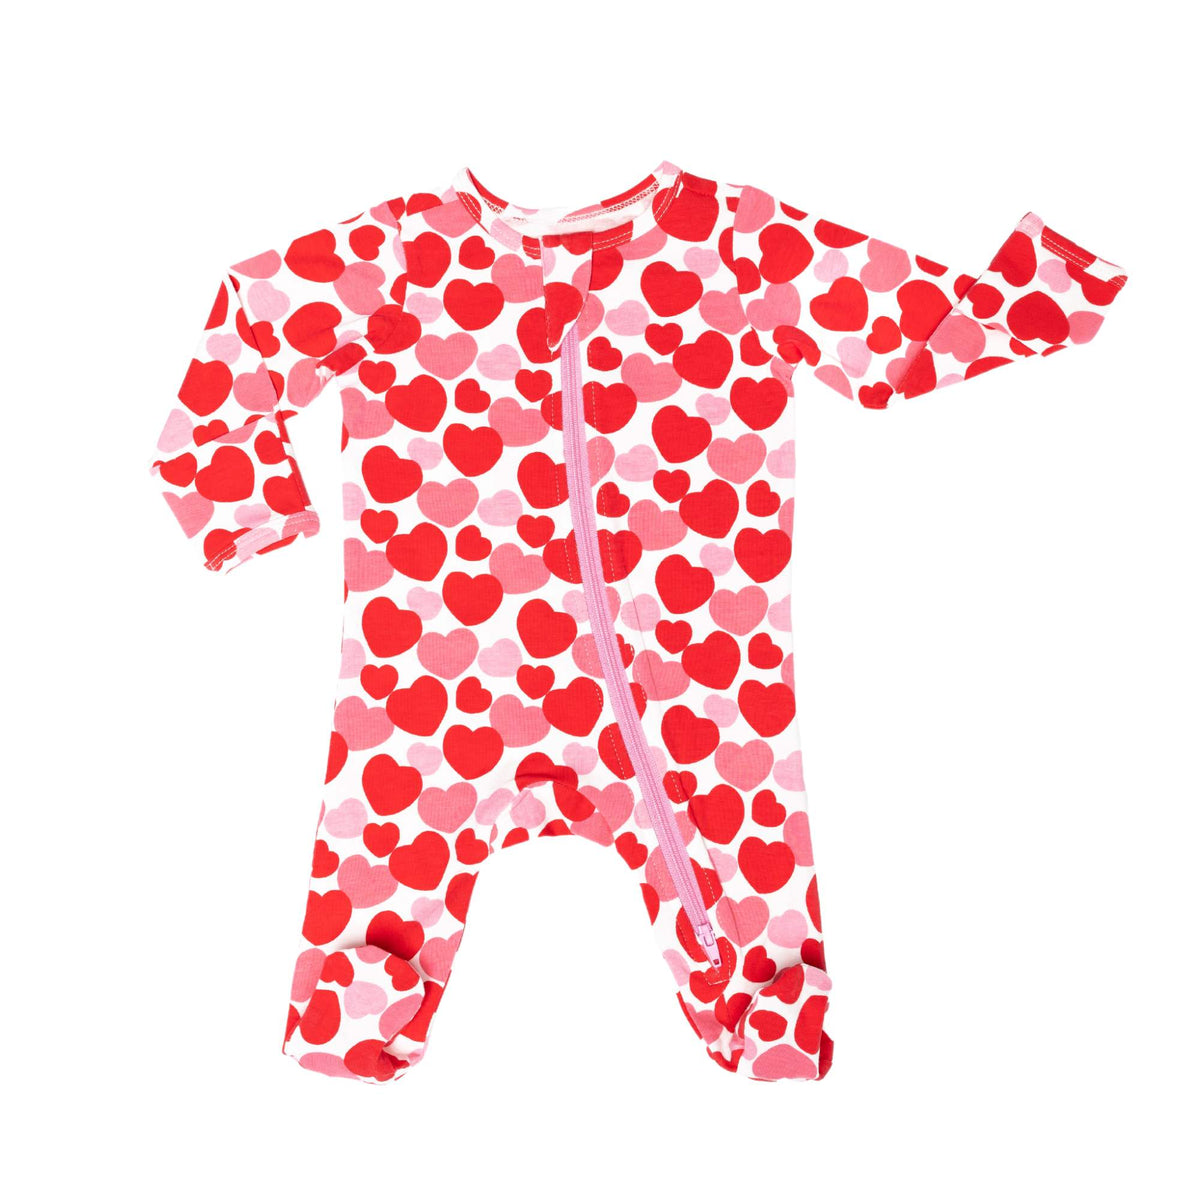 Norani Baby Footed Zipper Onesie in REd and Pink Hearts